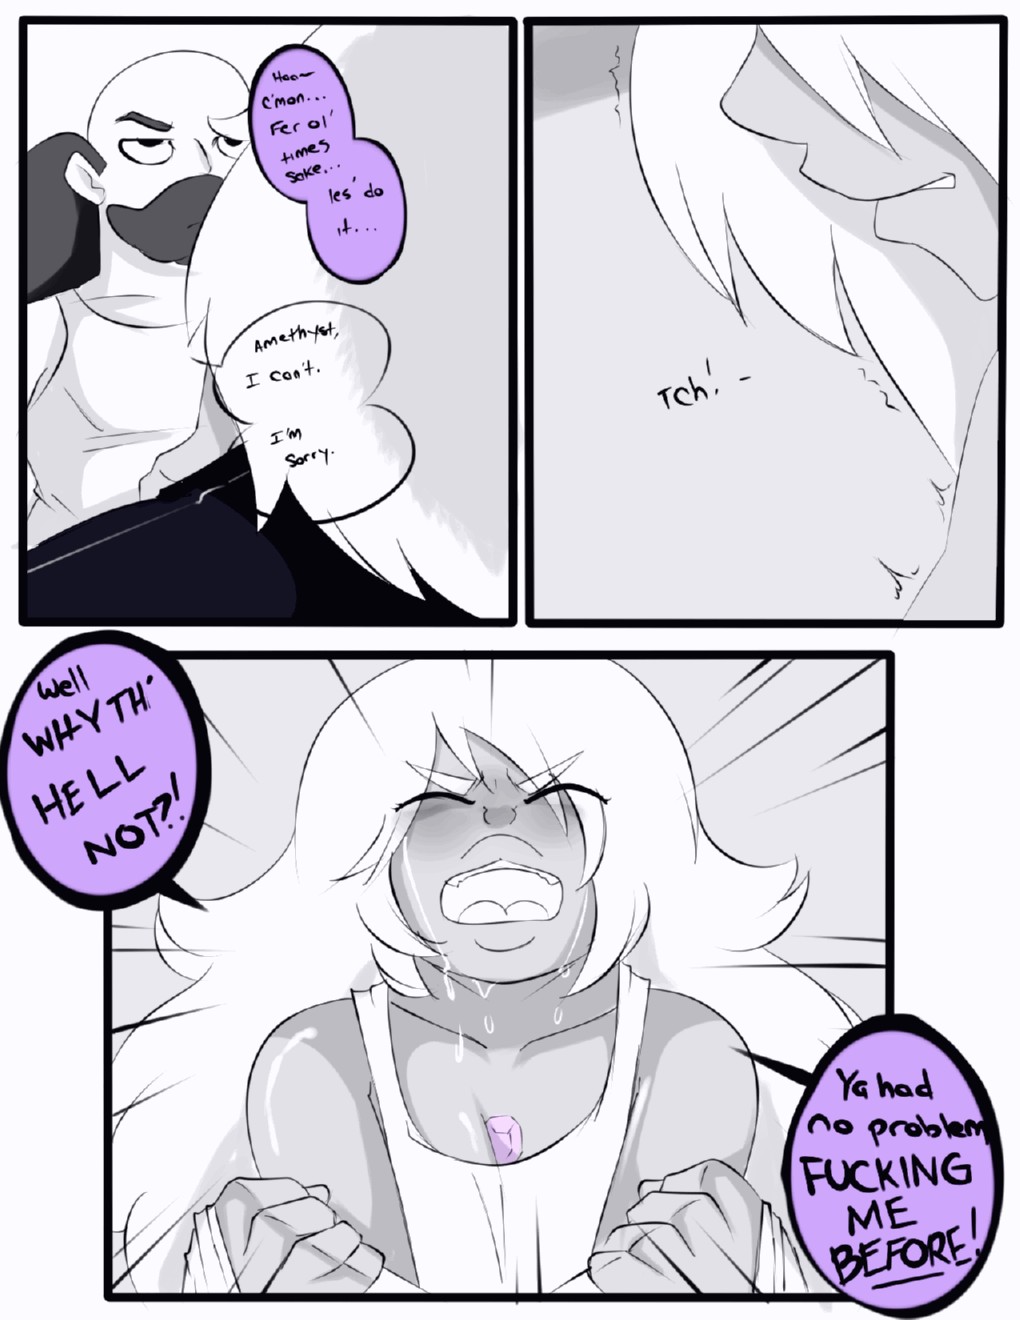 Amethyst's drinking problem porn comic page 003